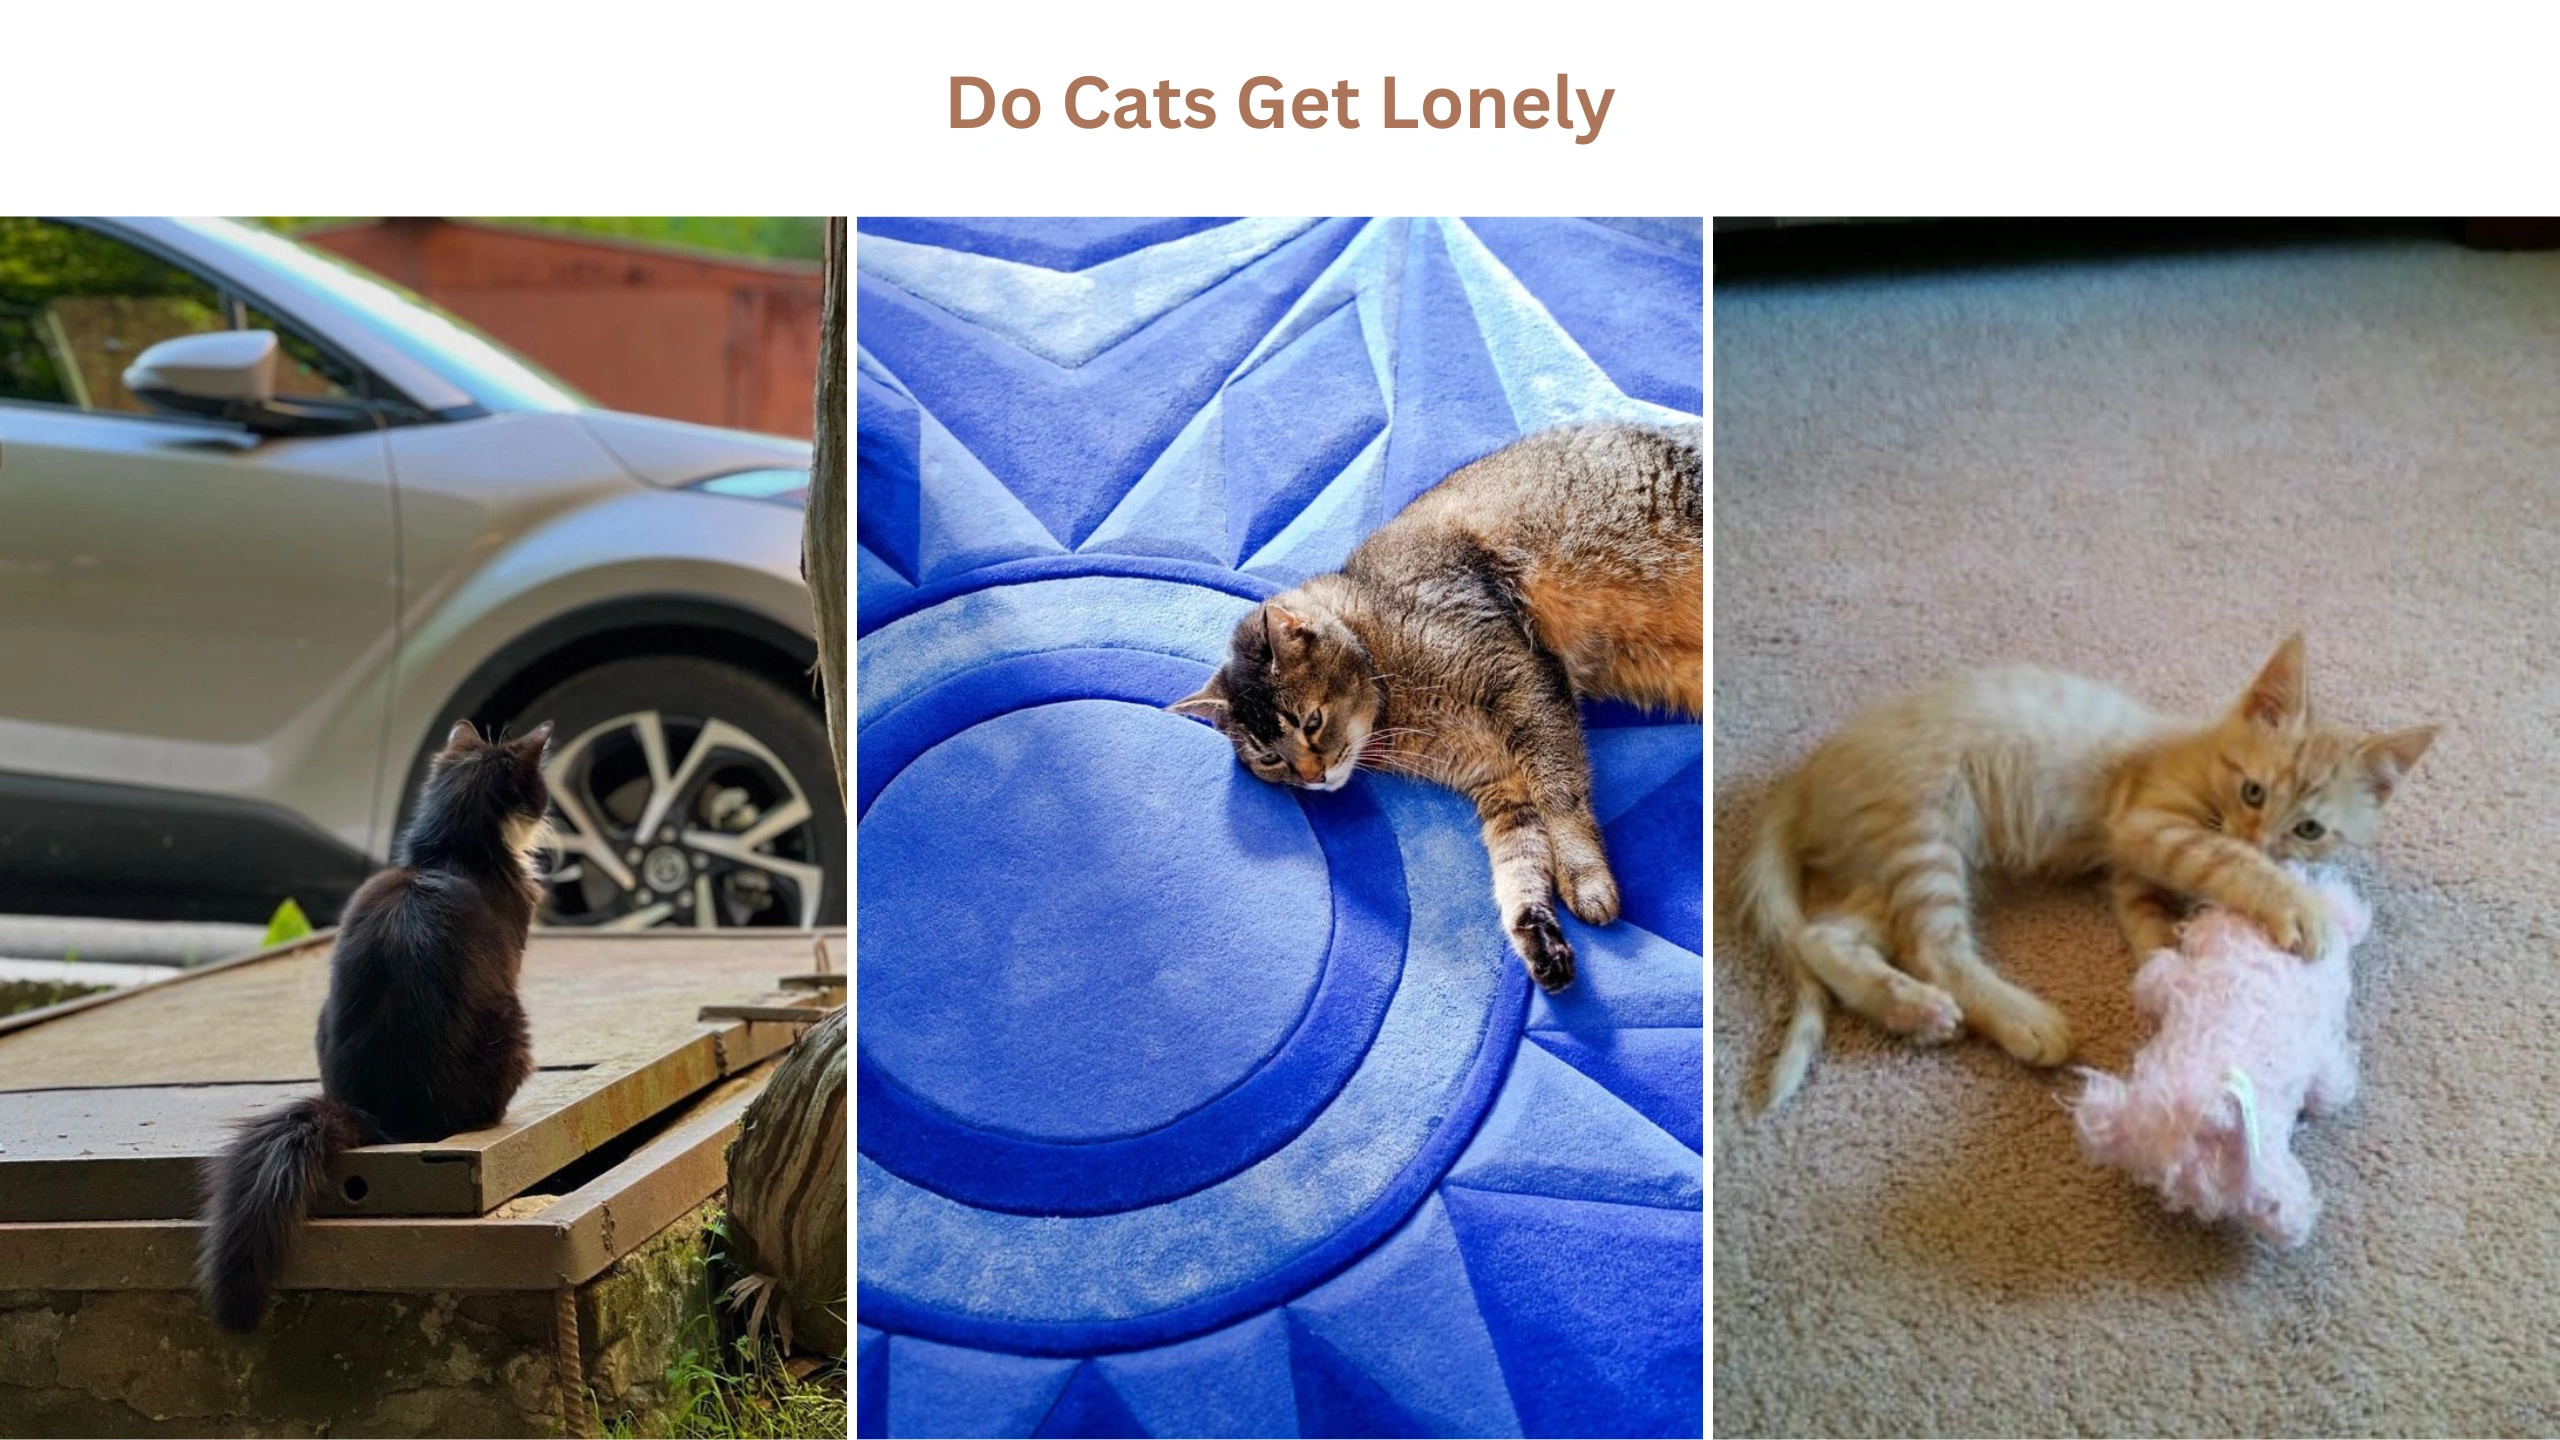 Do cats get lonely